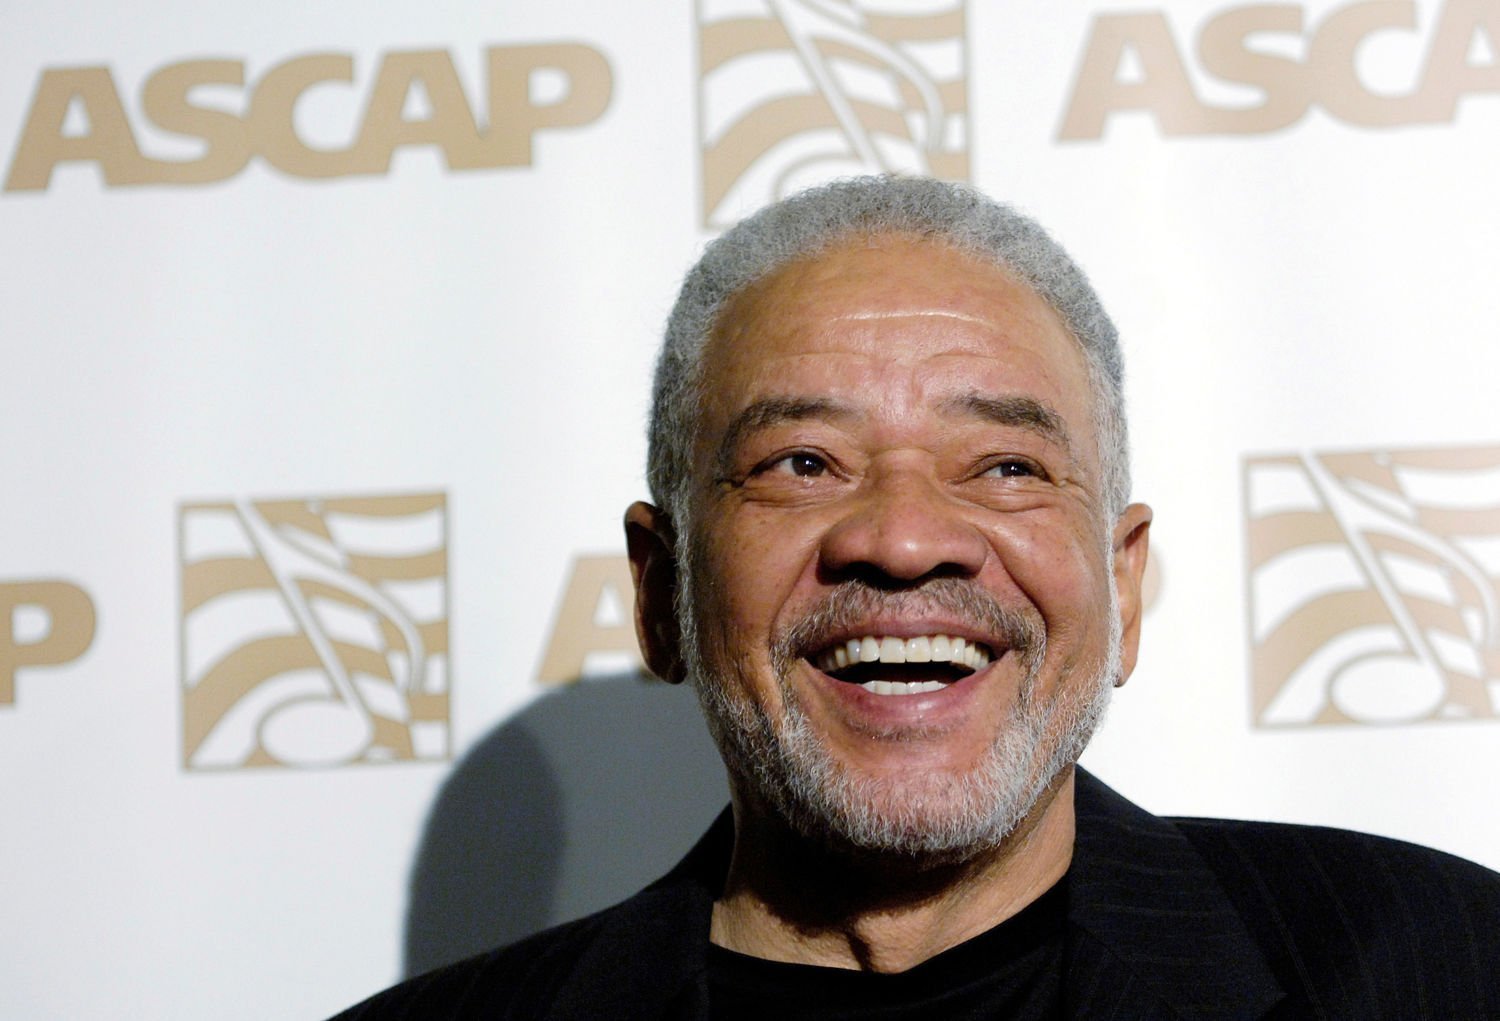 Soul legend Bill Withers, singer of Lean On Me, Aint No 